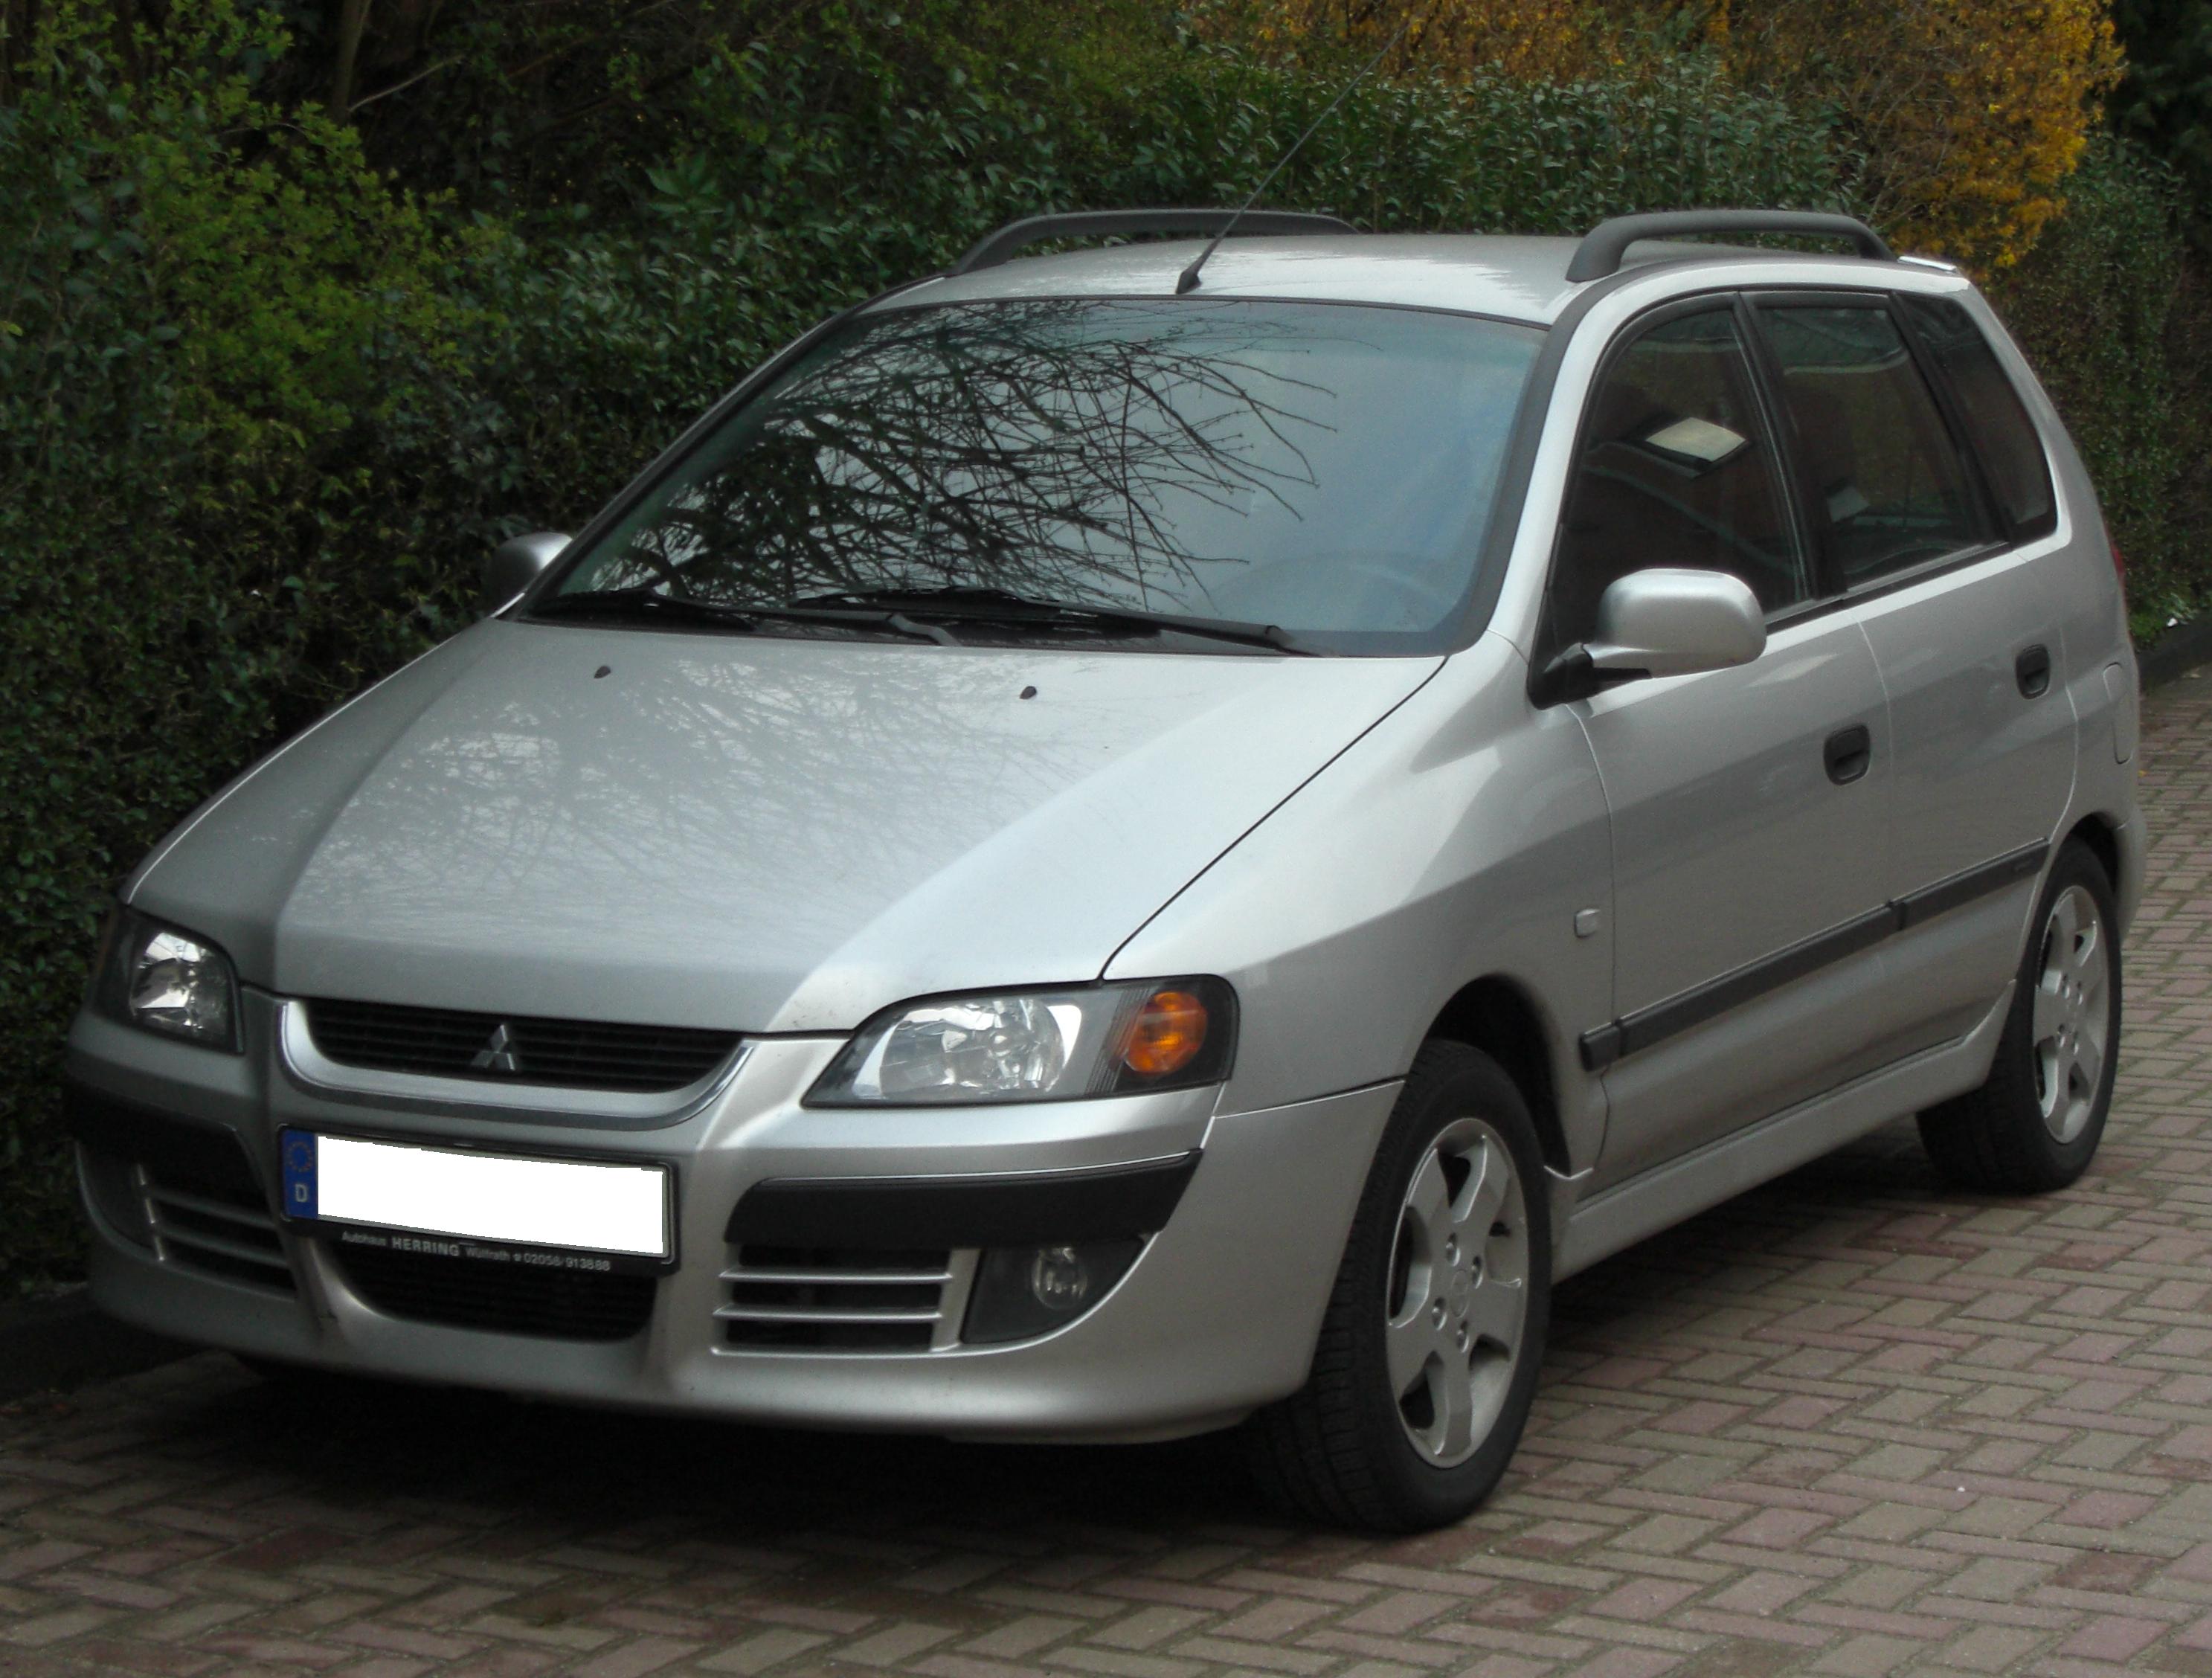 File:Mitsubishi Space Facelift front.jpg - Commons